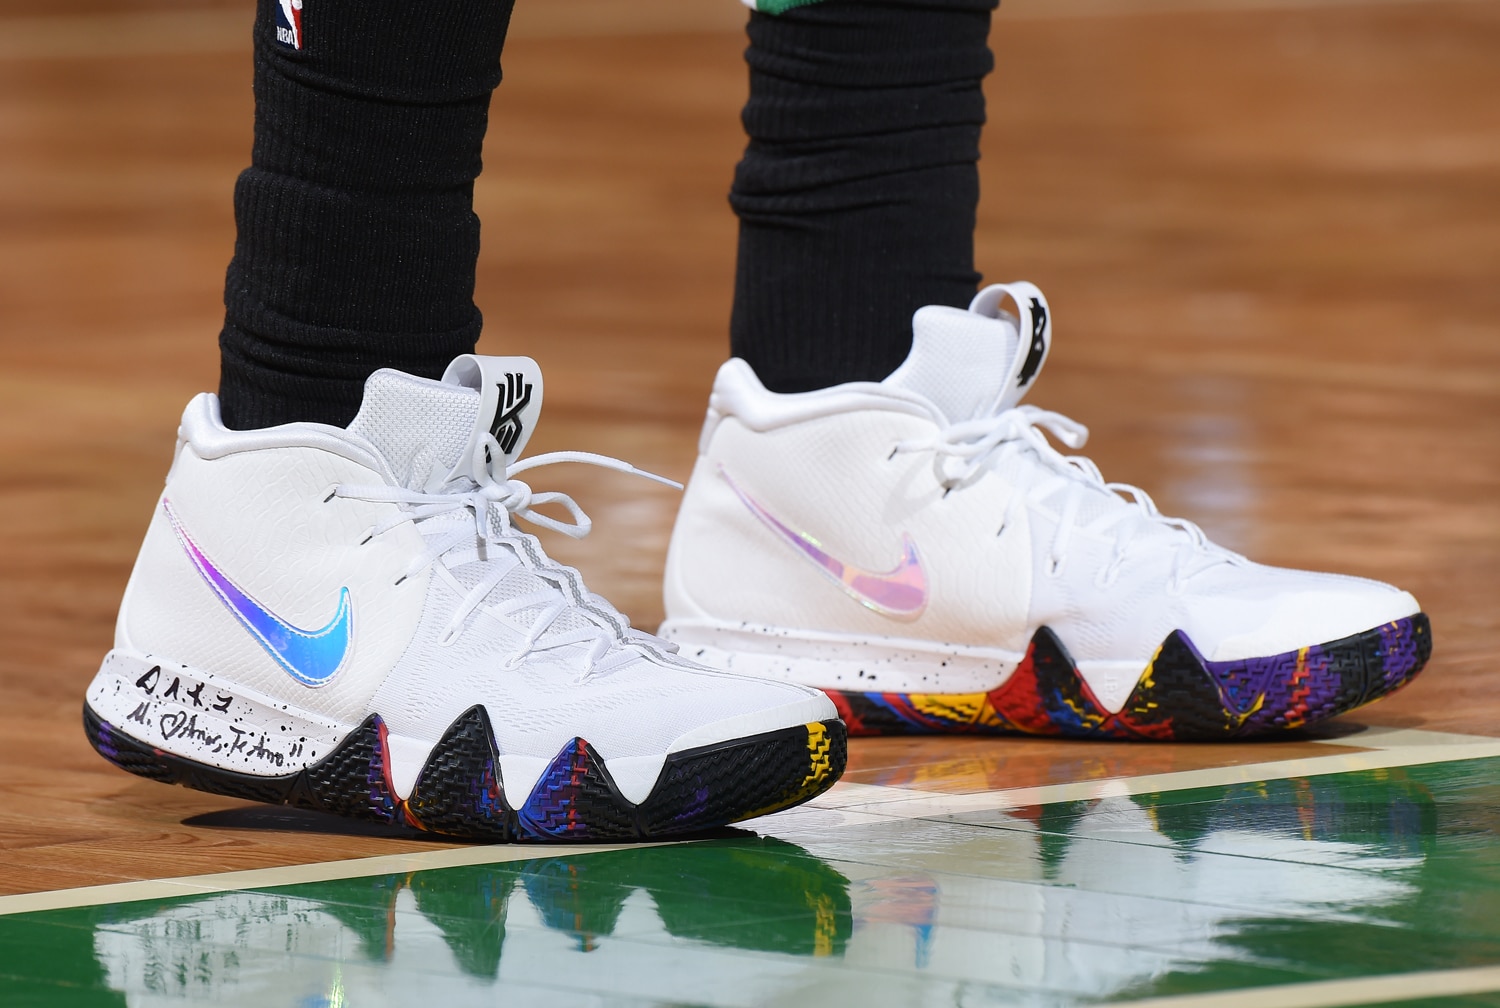 kyrie irving shoes march madness